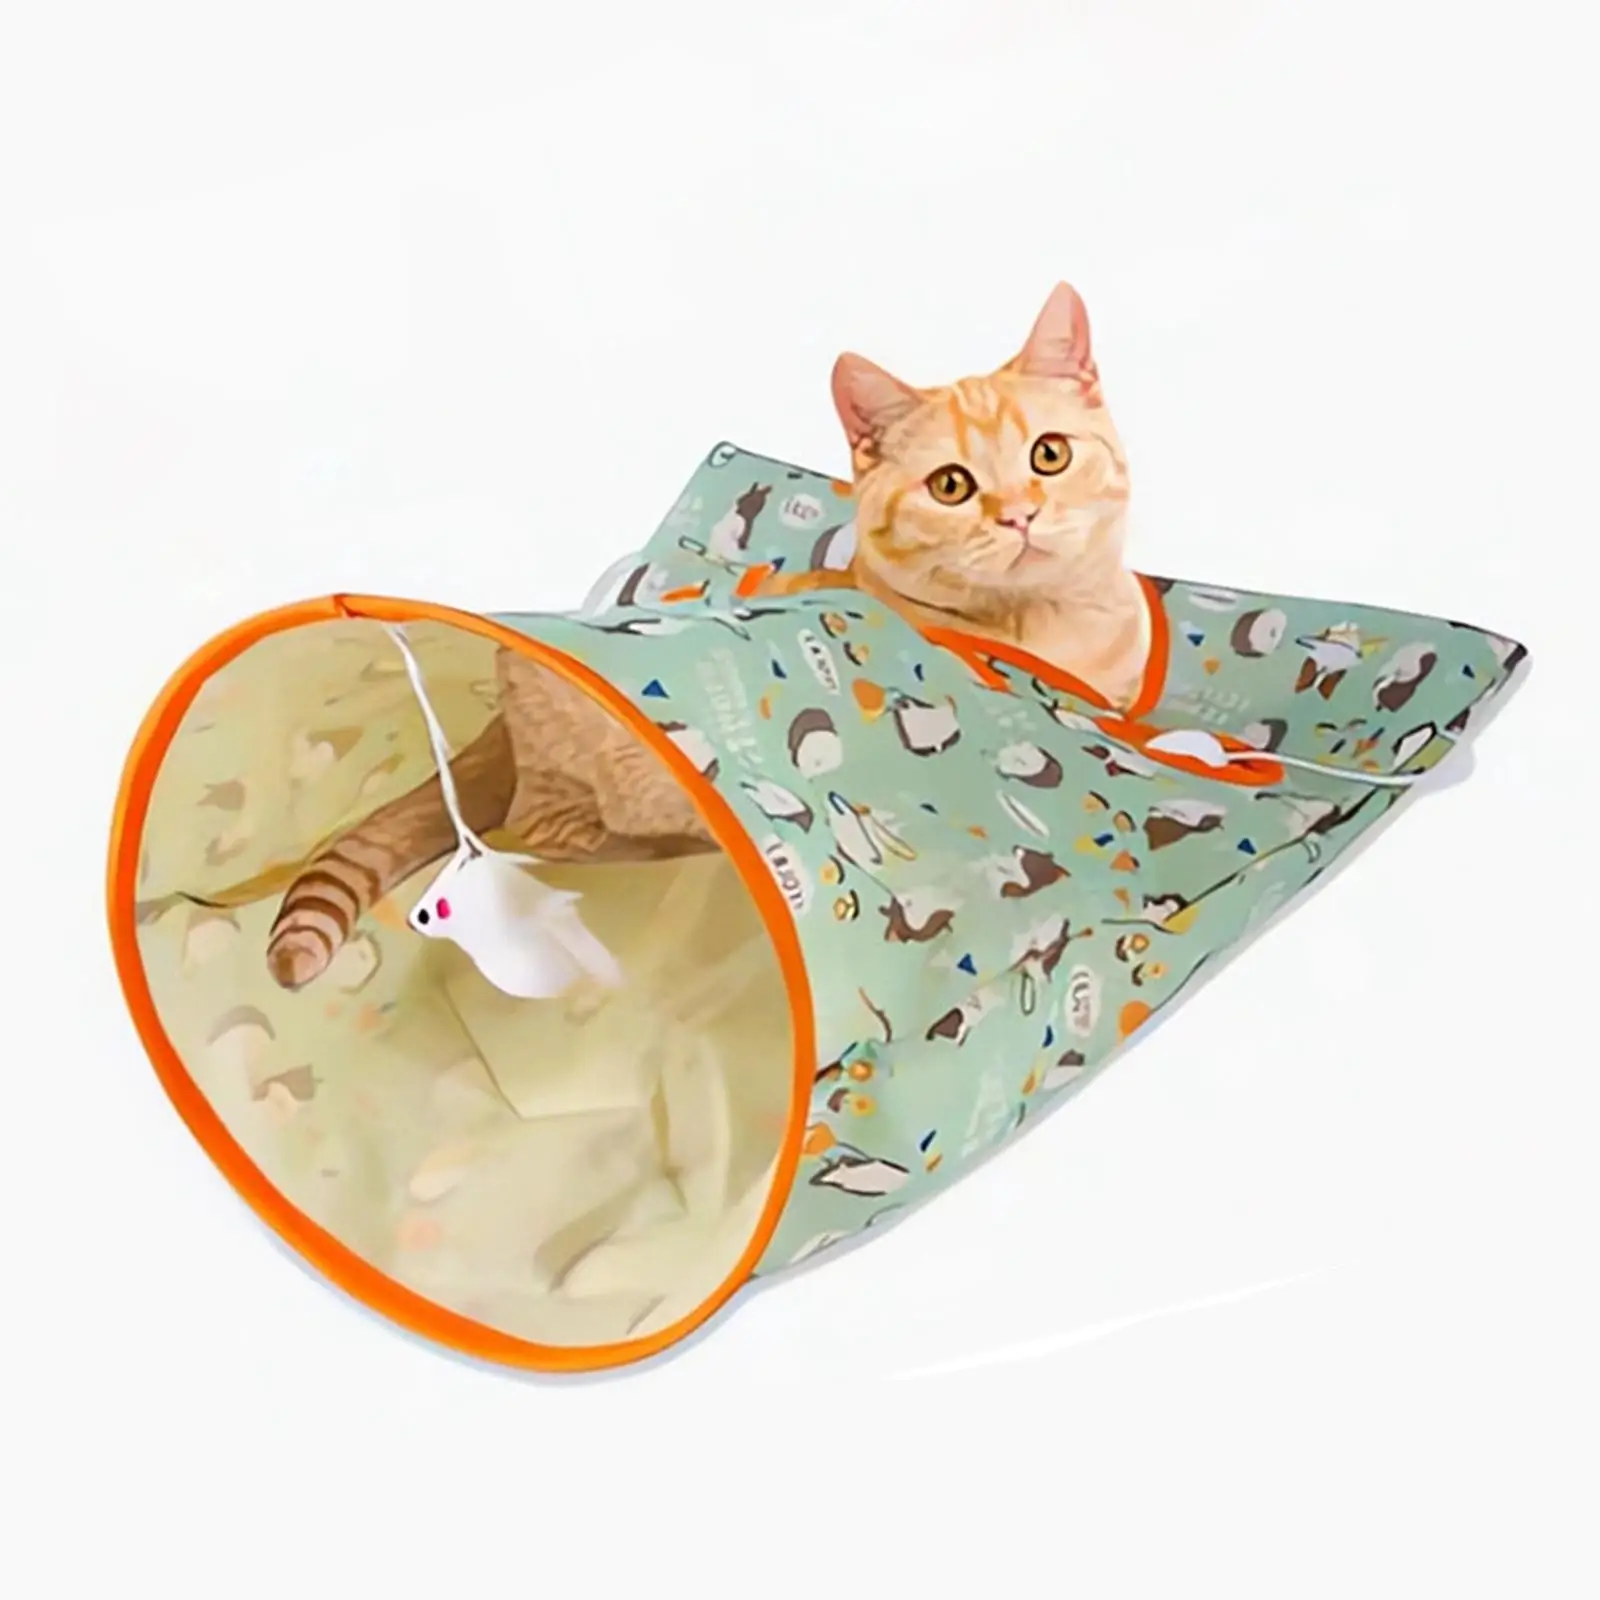 Cat Tunnel for Indoor Cats Durable with Ball Indoor Animal Play Toy Folded Cat Puzzle Toy for Rabbit Kitten Puppy Cat Training